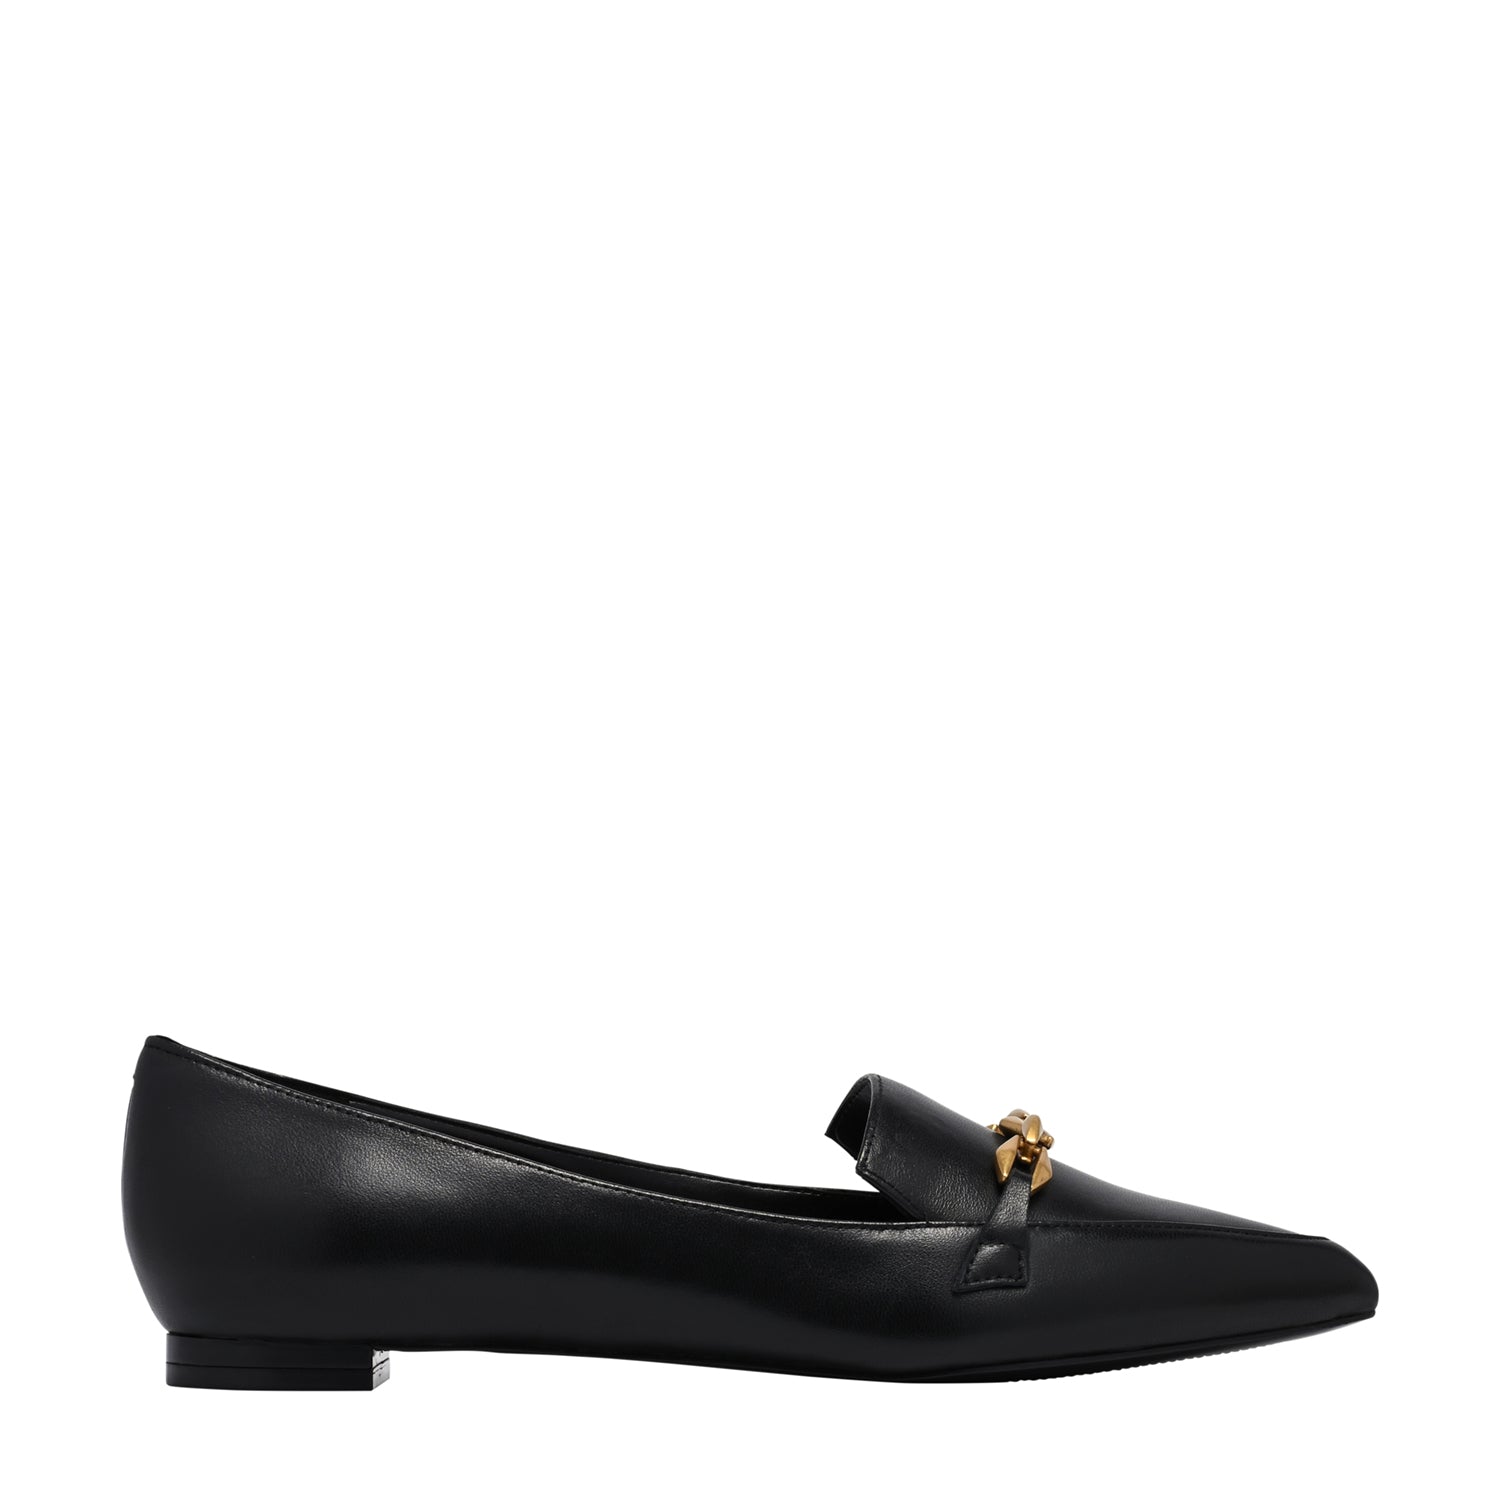 AHARA LOAFERS